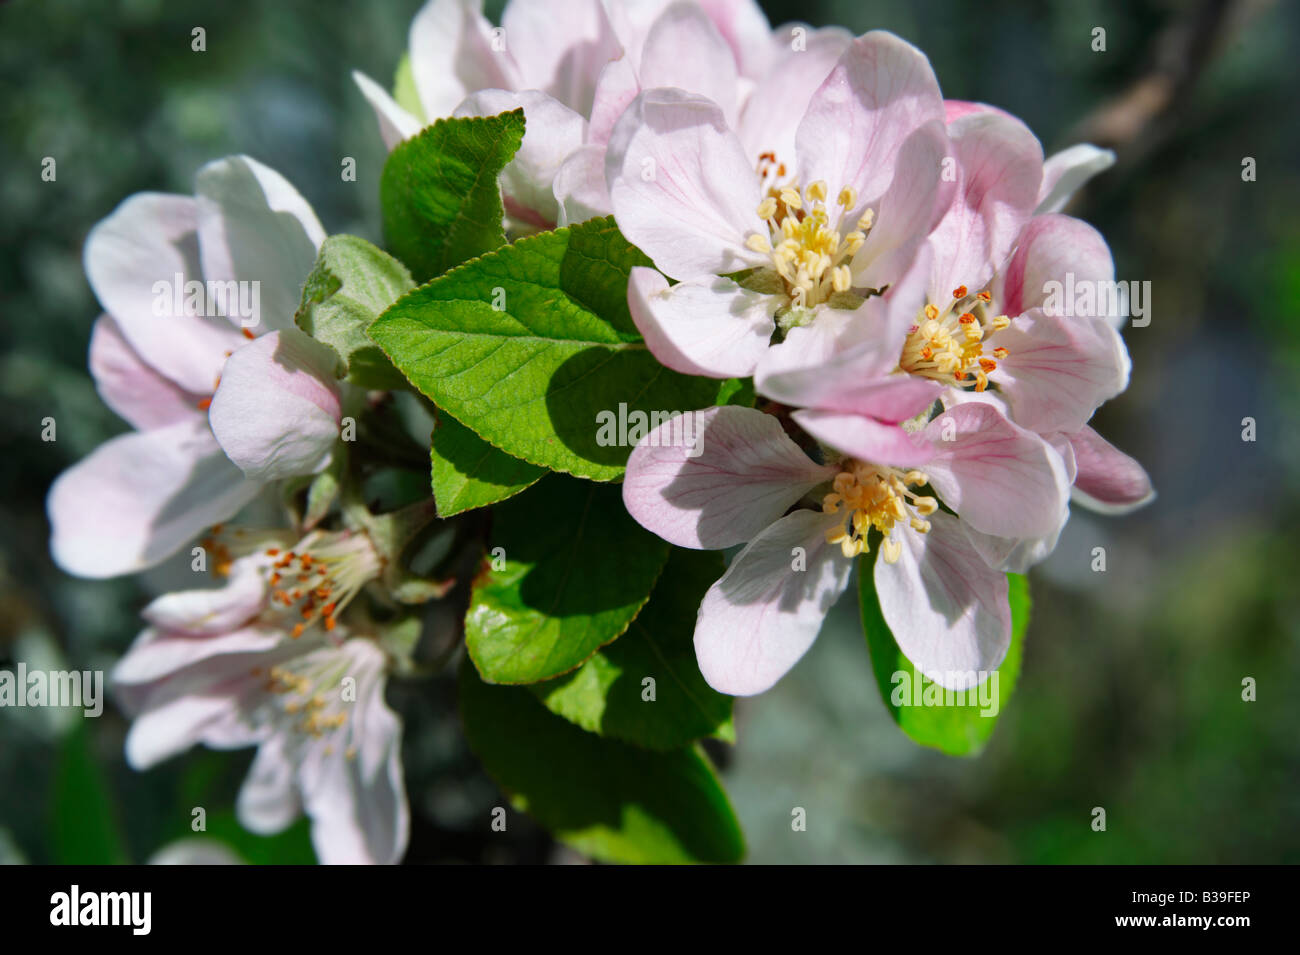 Apple Blossom flowering on a tree Stock Photo